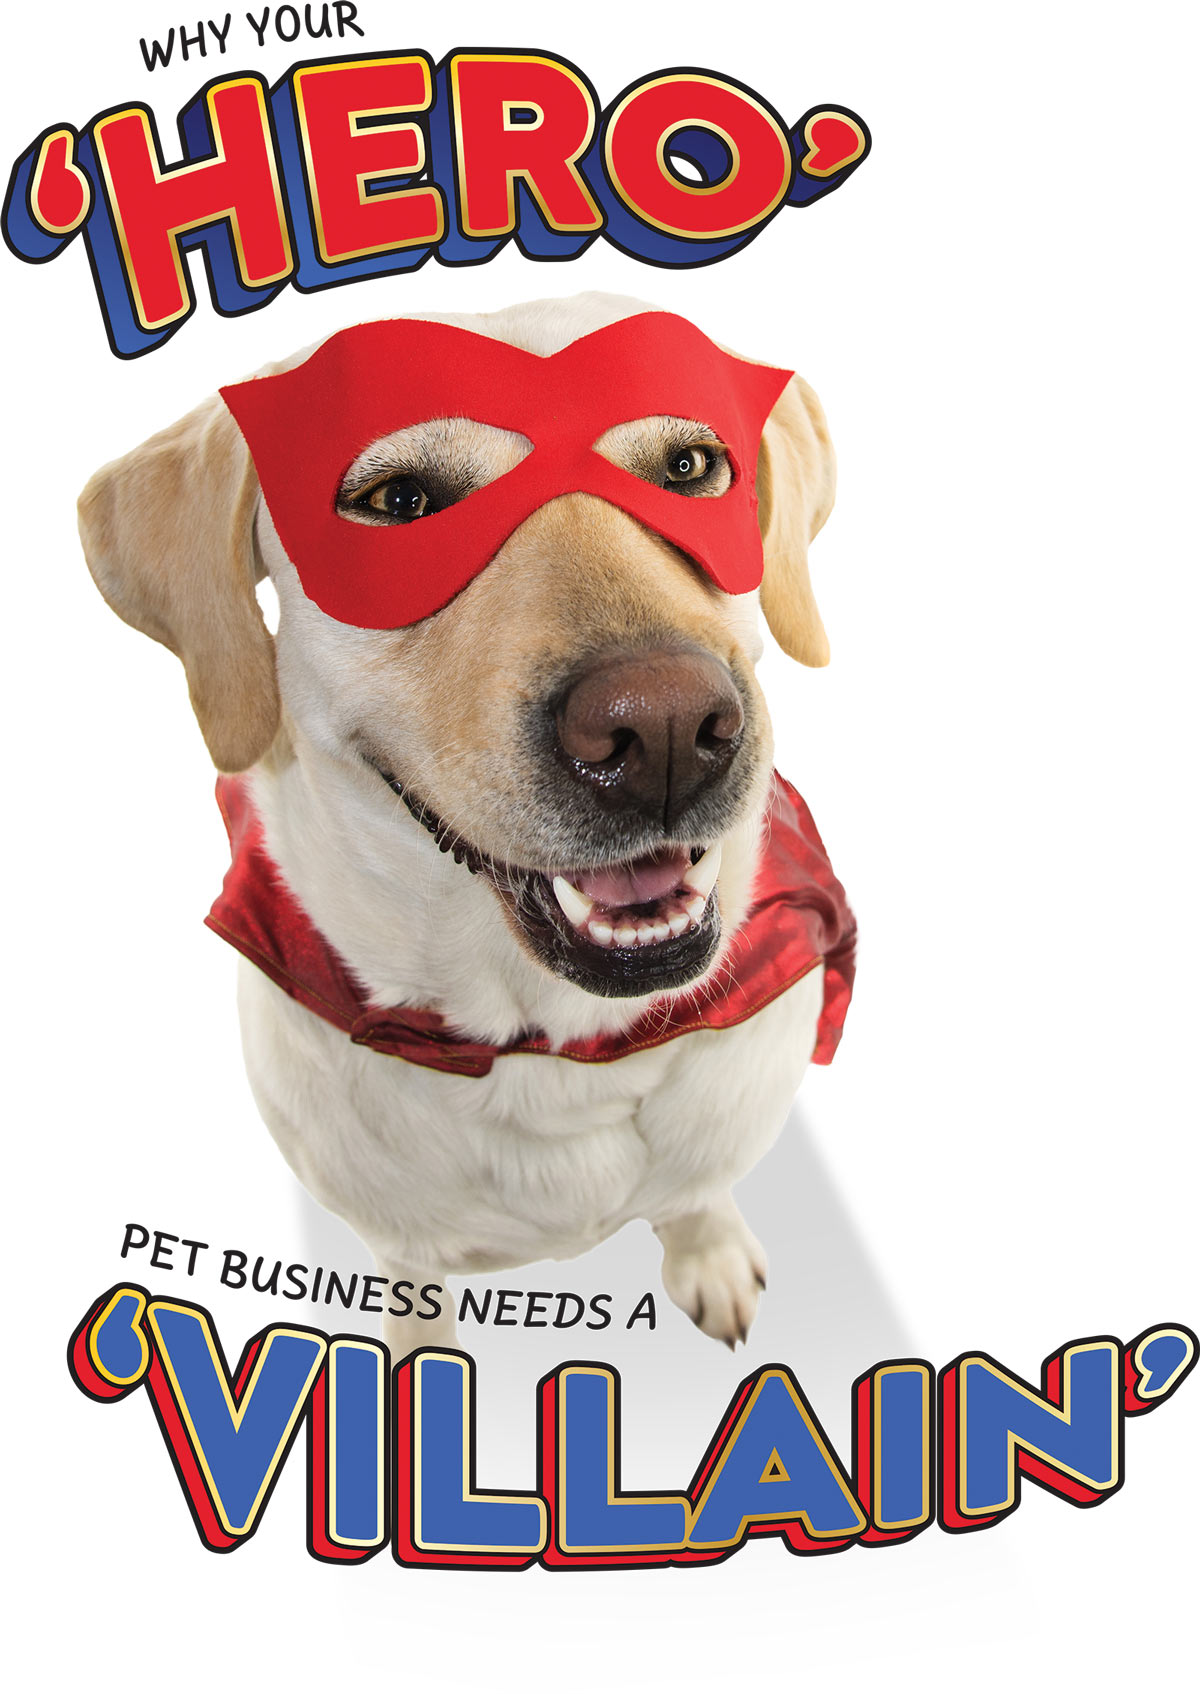 Why Your Hero Pet Business Needs a Villain